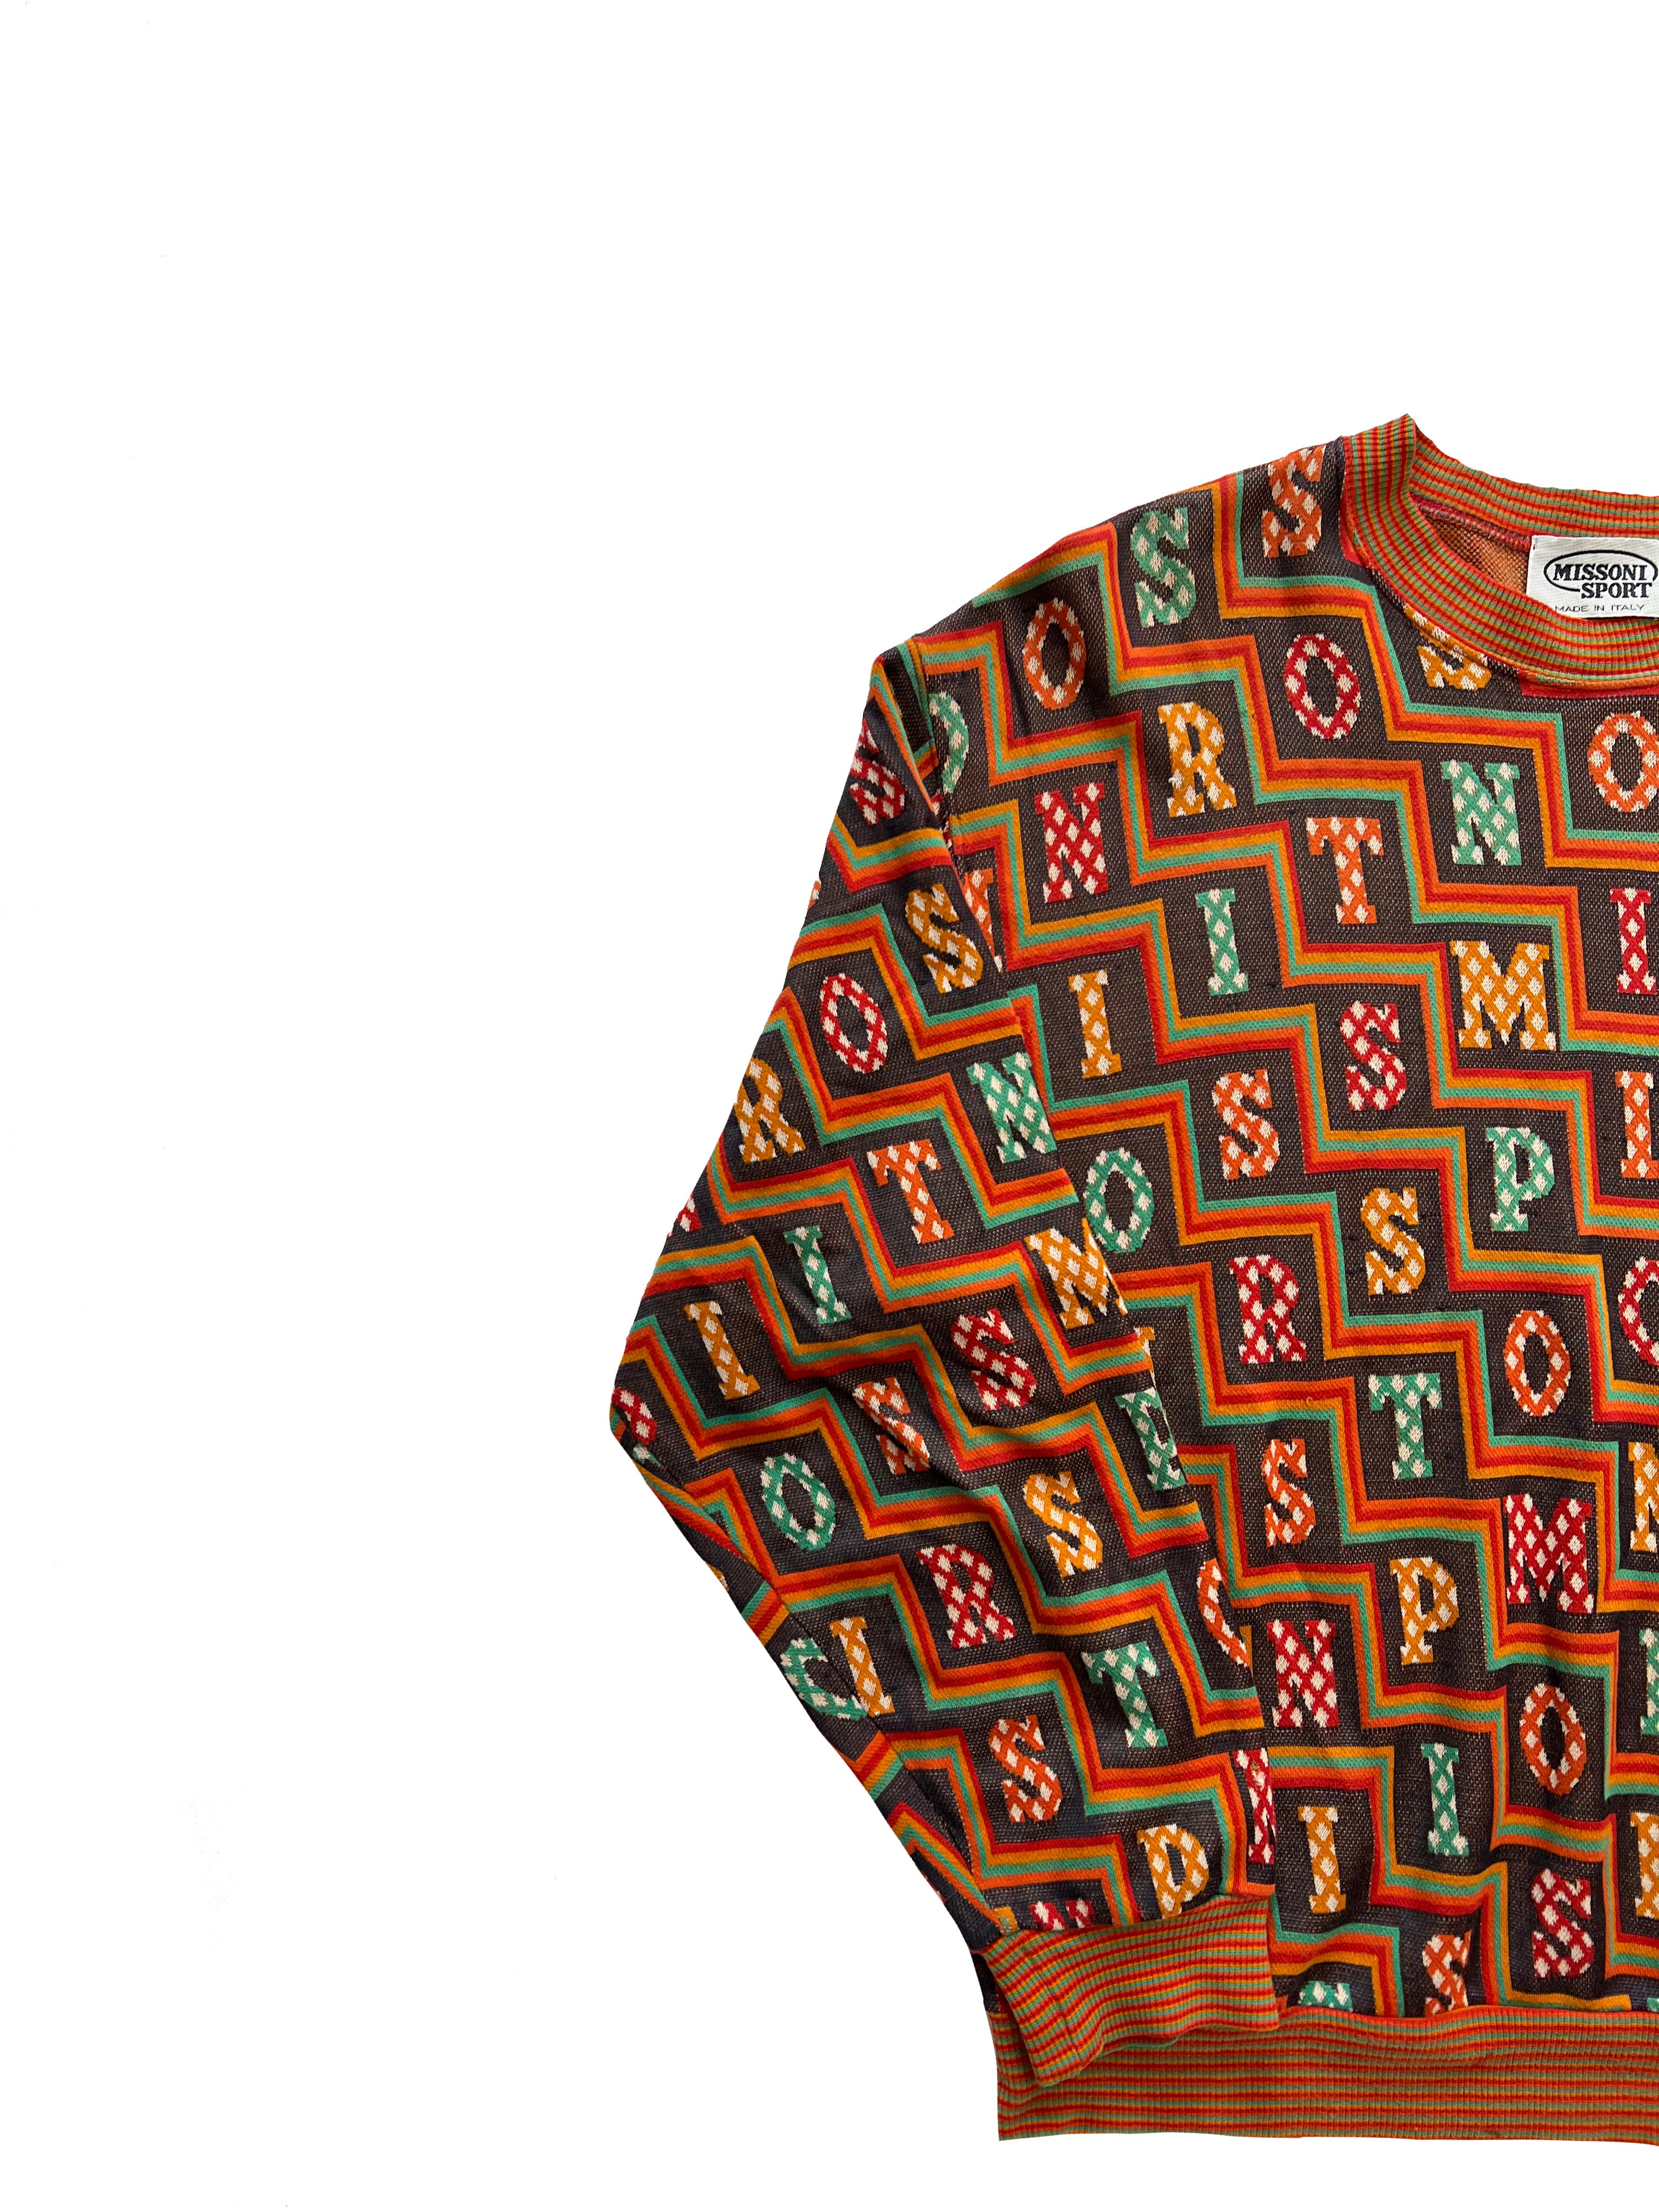 Missoni Sport Spell Out Jumper 90's